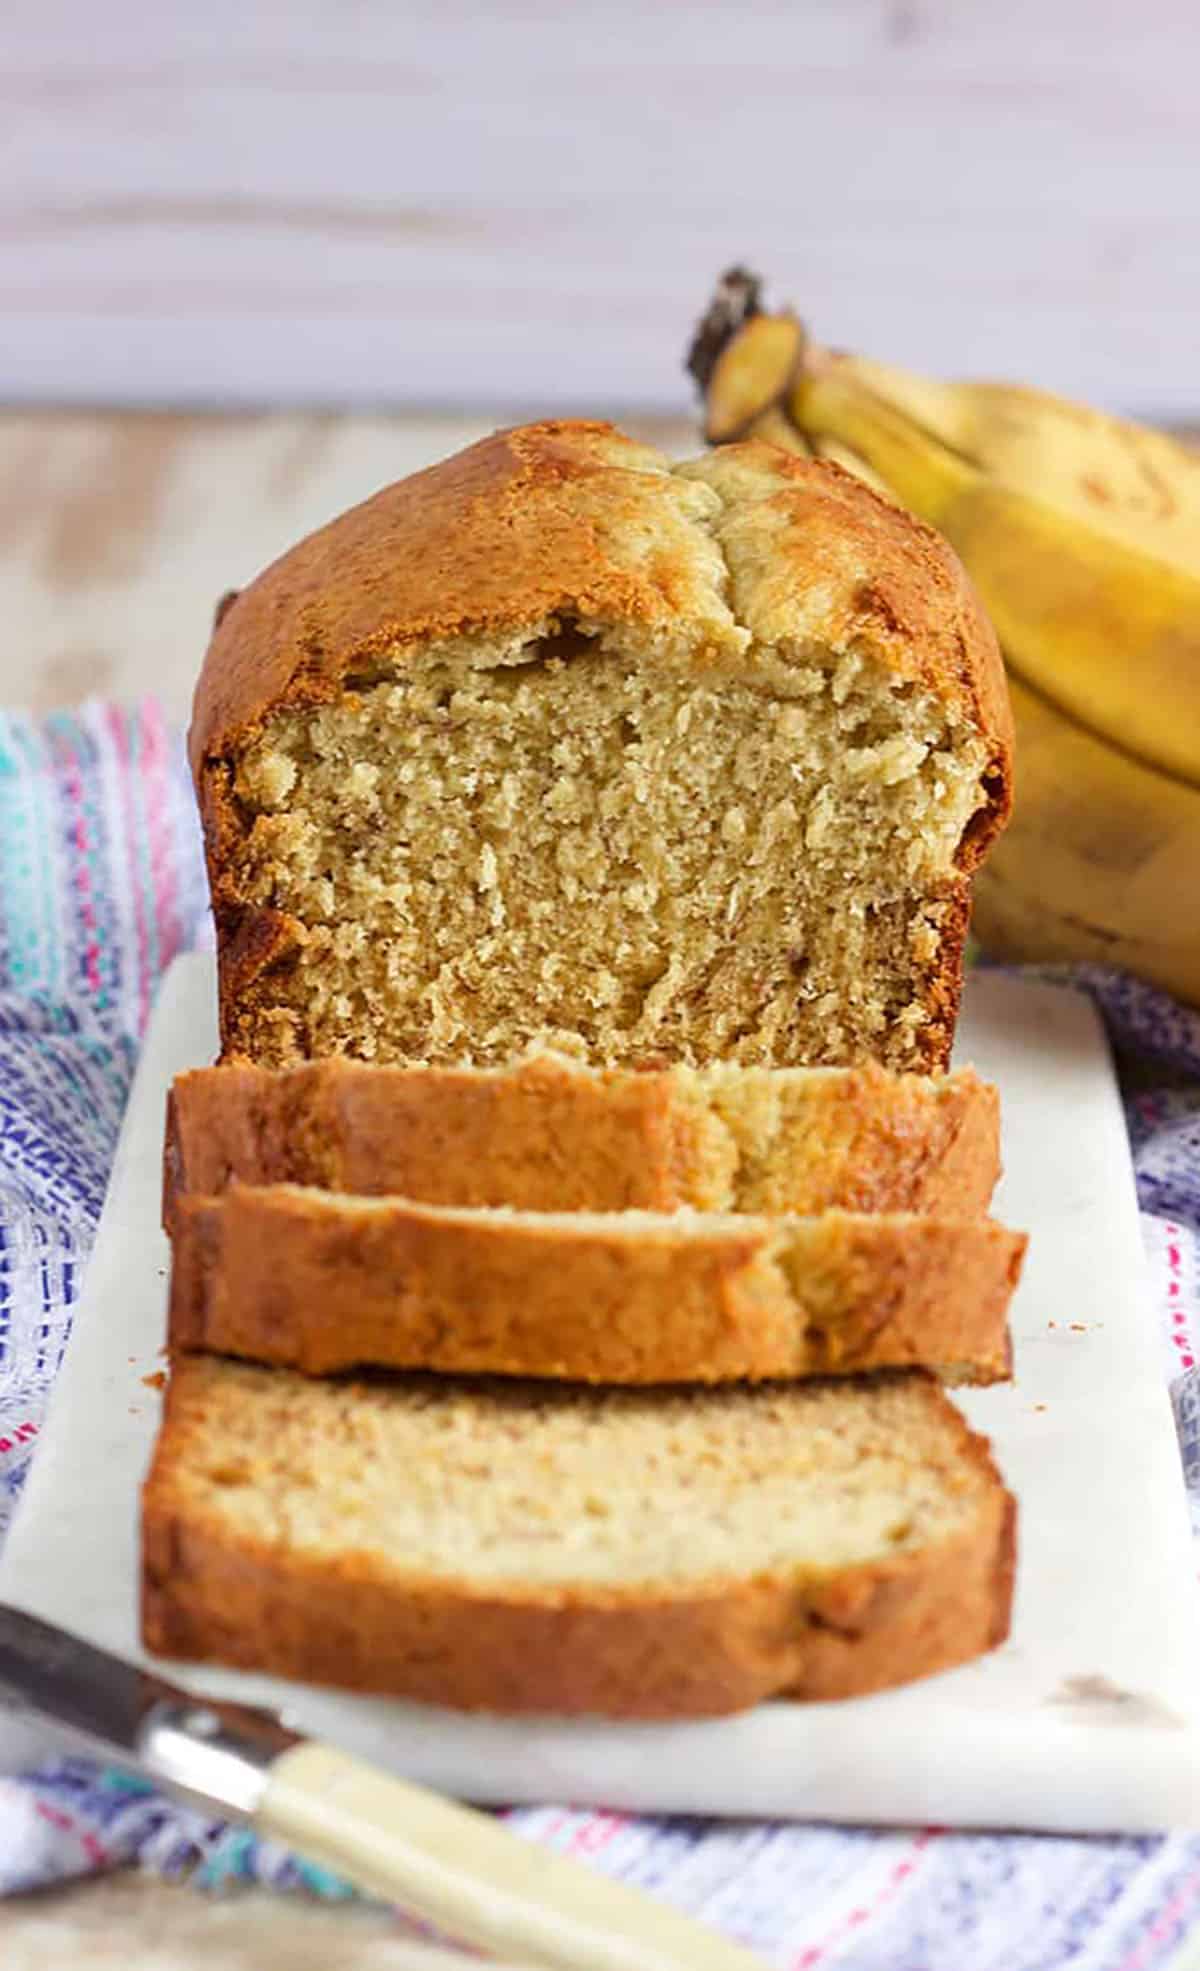 Banana Bread sliced on a marble board with bananas in the background.